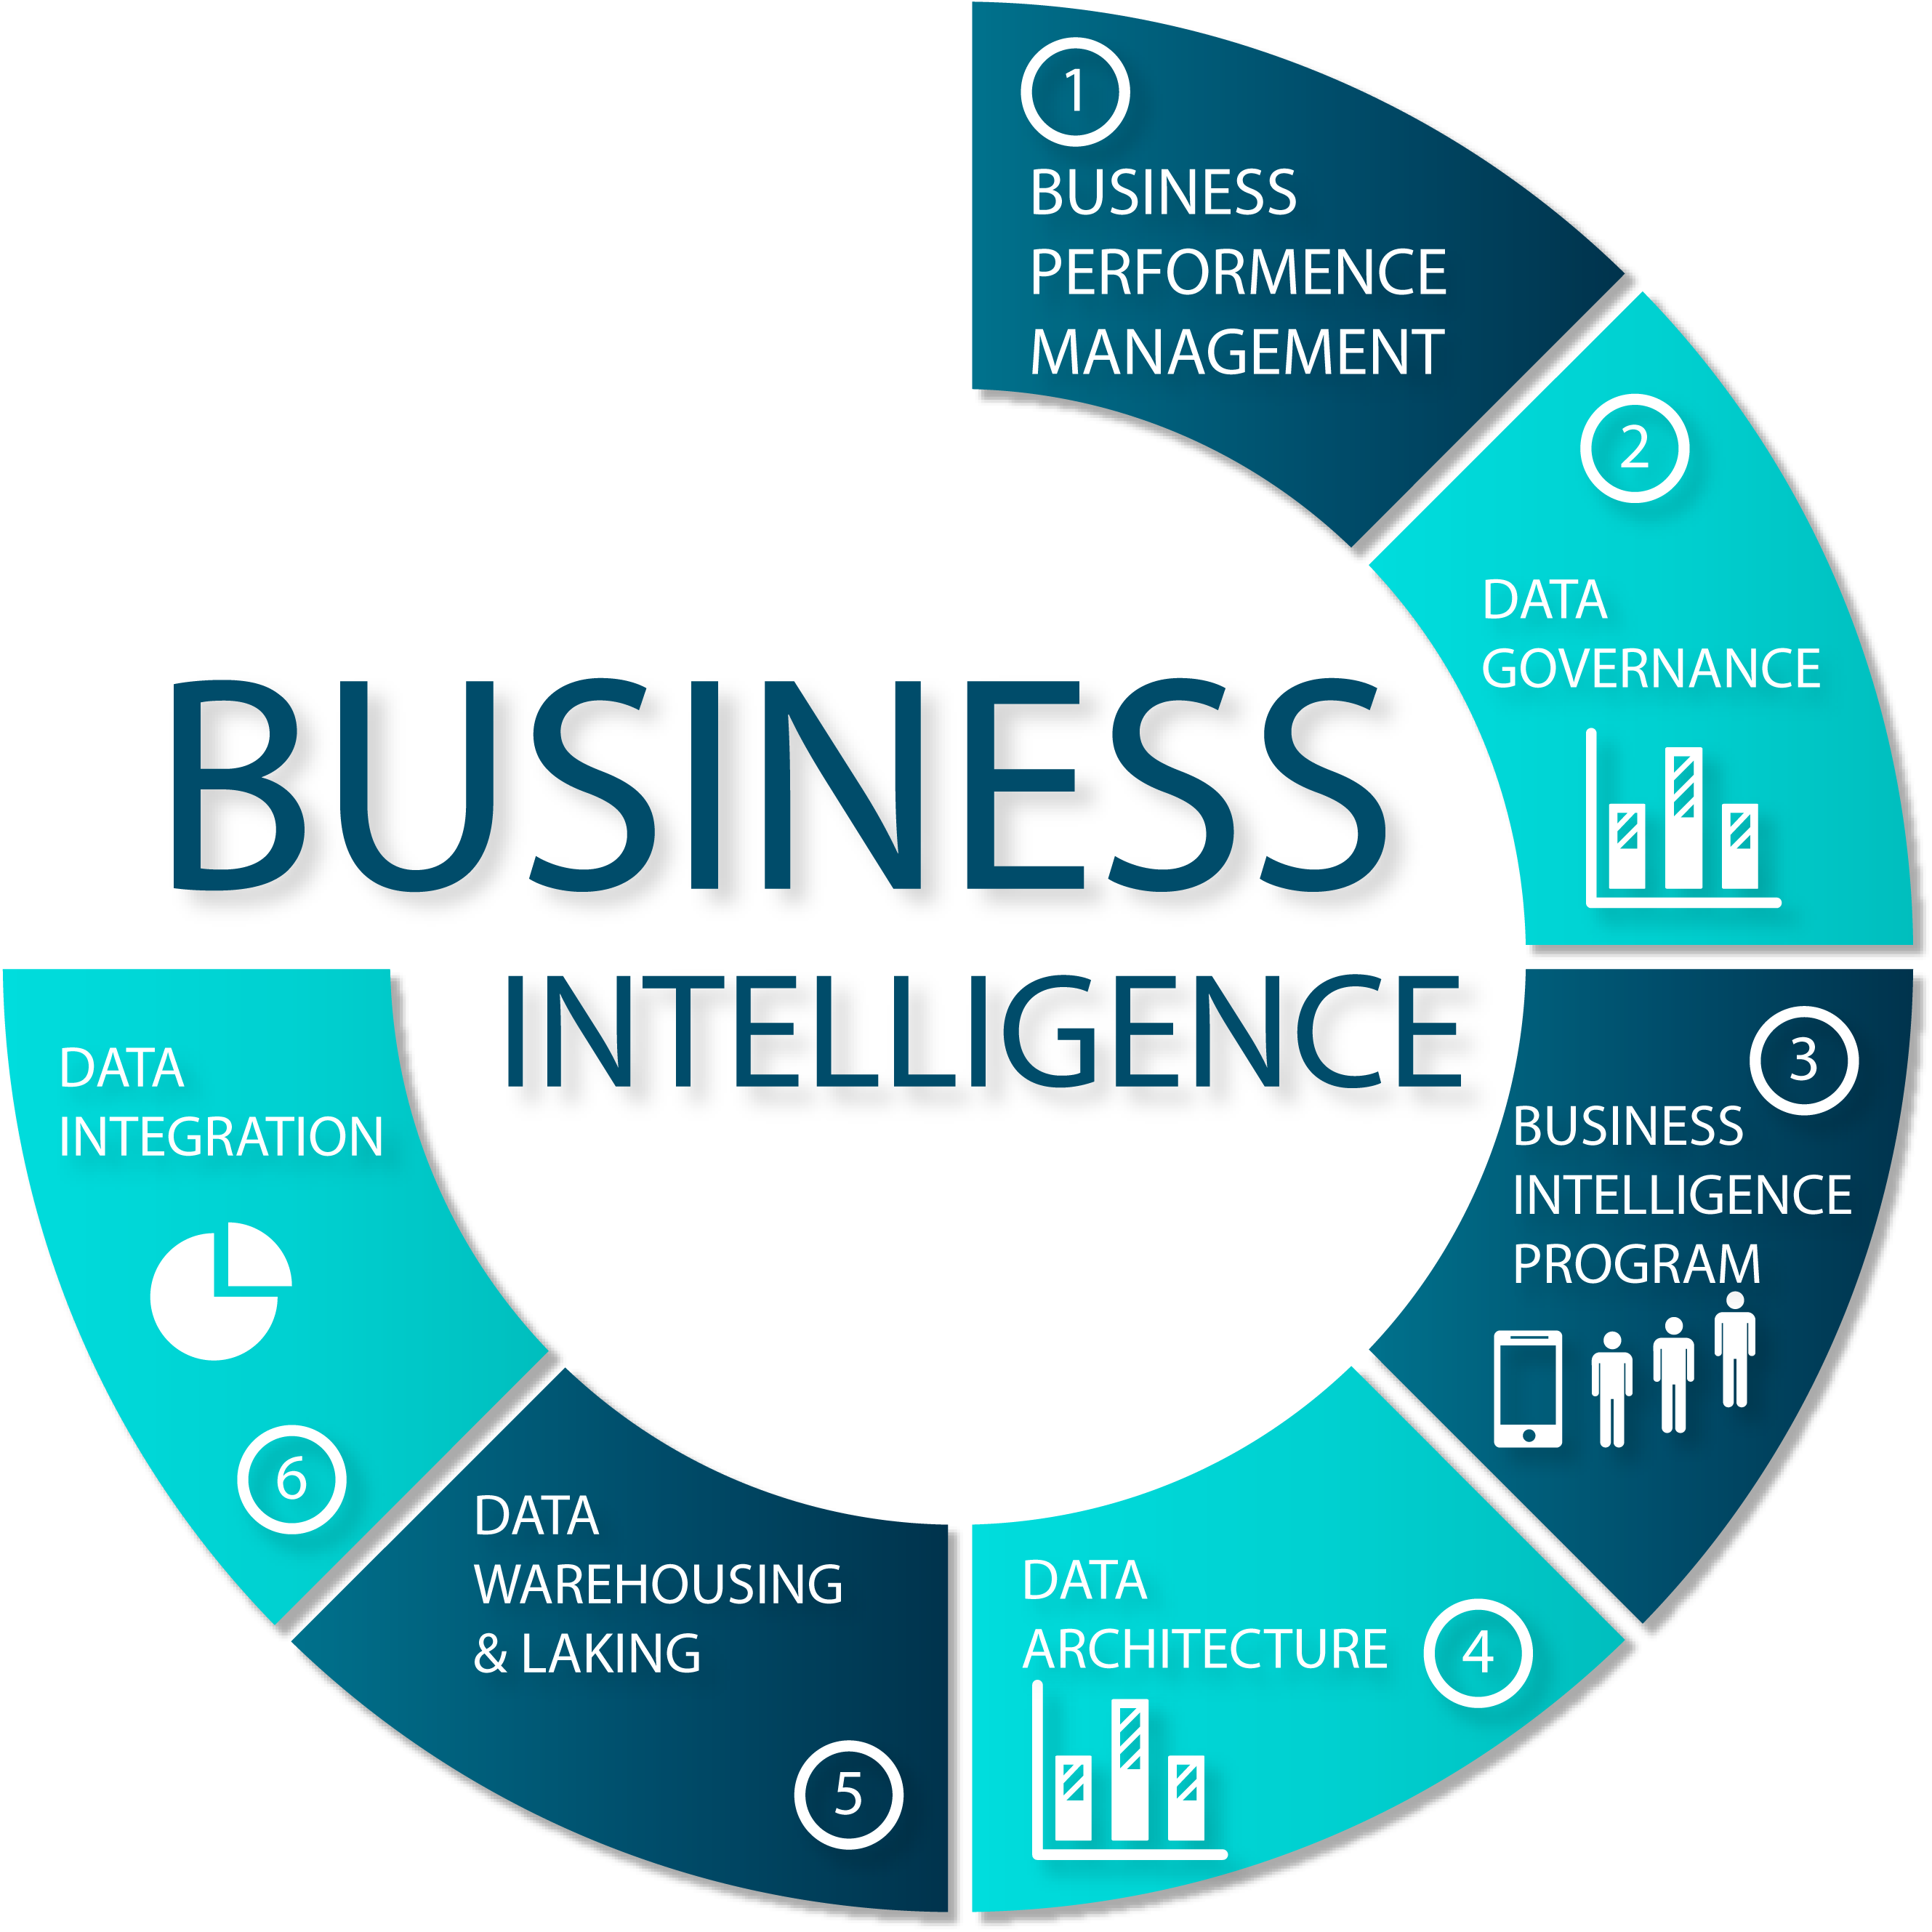 What are the key features of your Business Intelligence Platform?